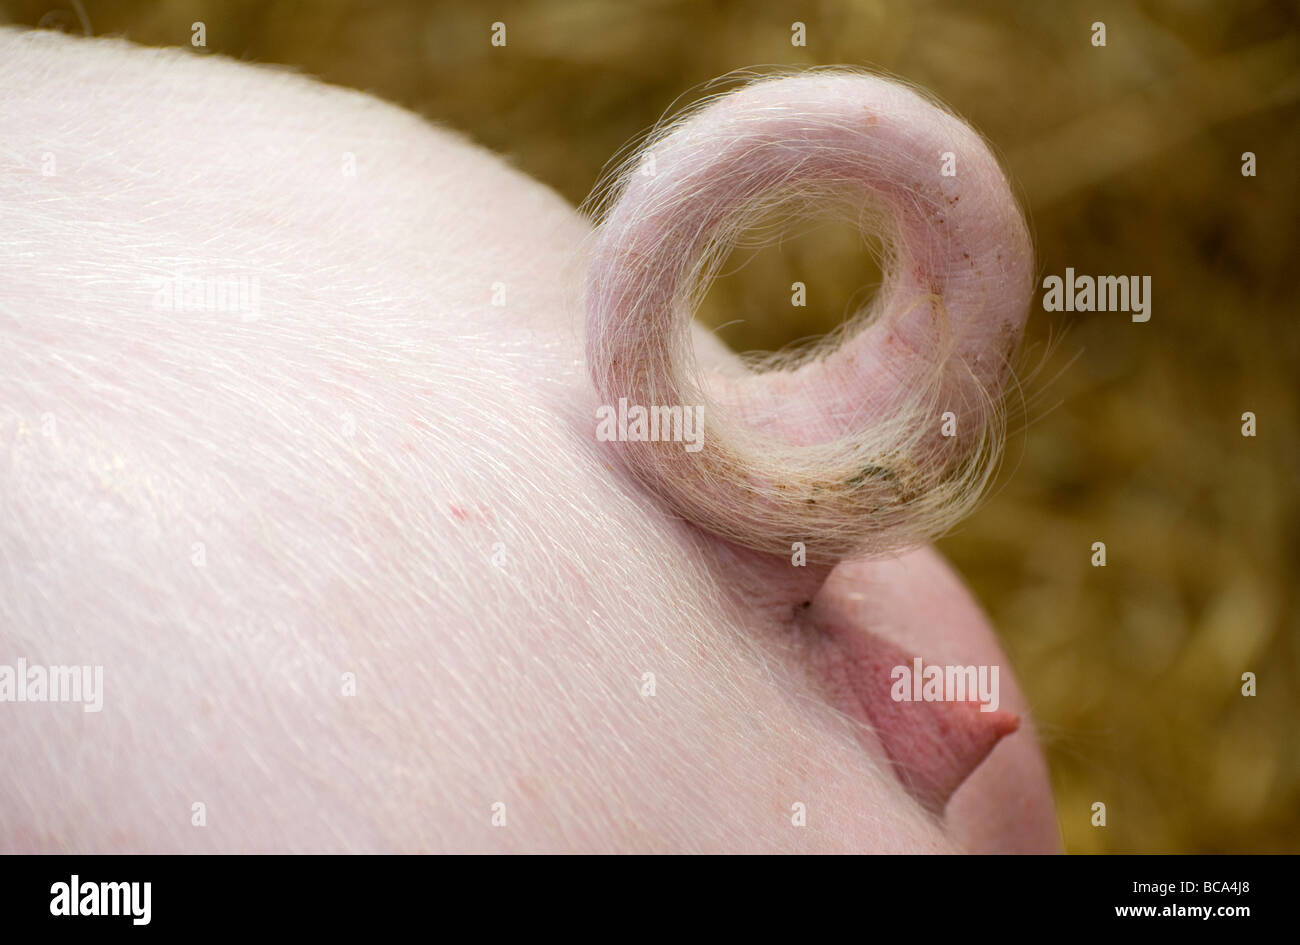 curled pig's tail Stock Photo